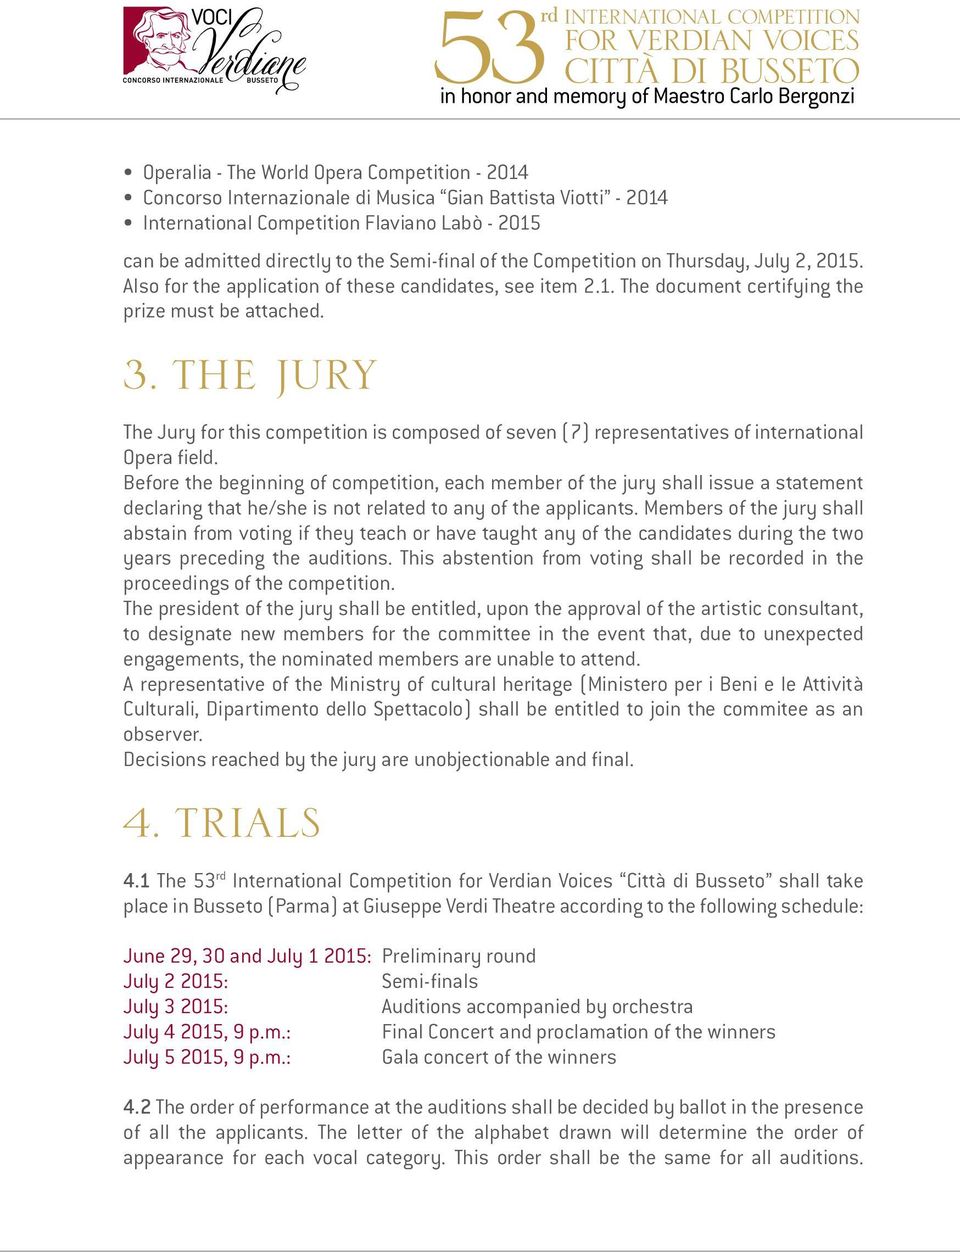 3. THE JURY The Jury for this competition is composed of seven (7) representatives of international Opera field.